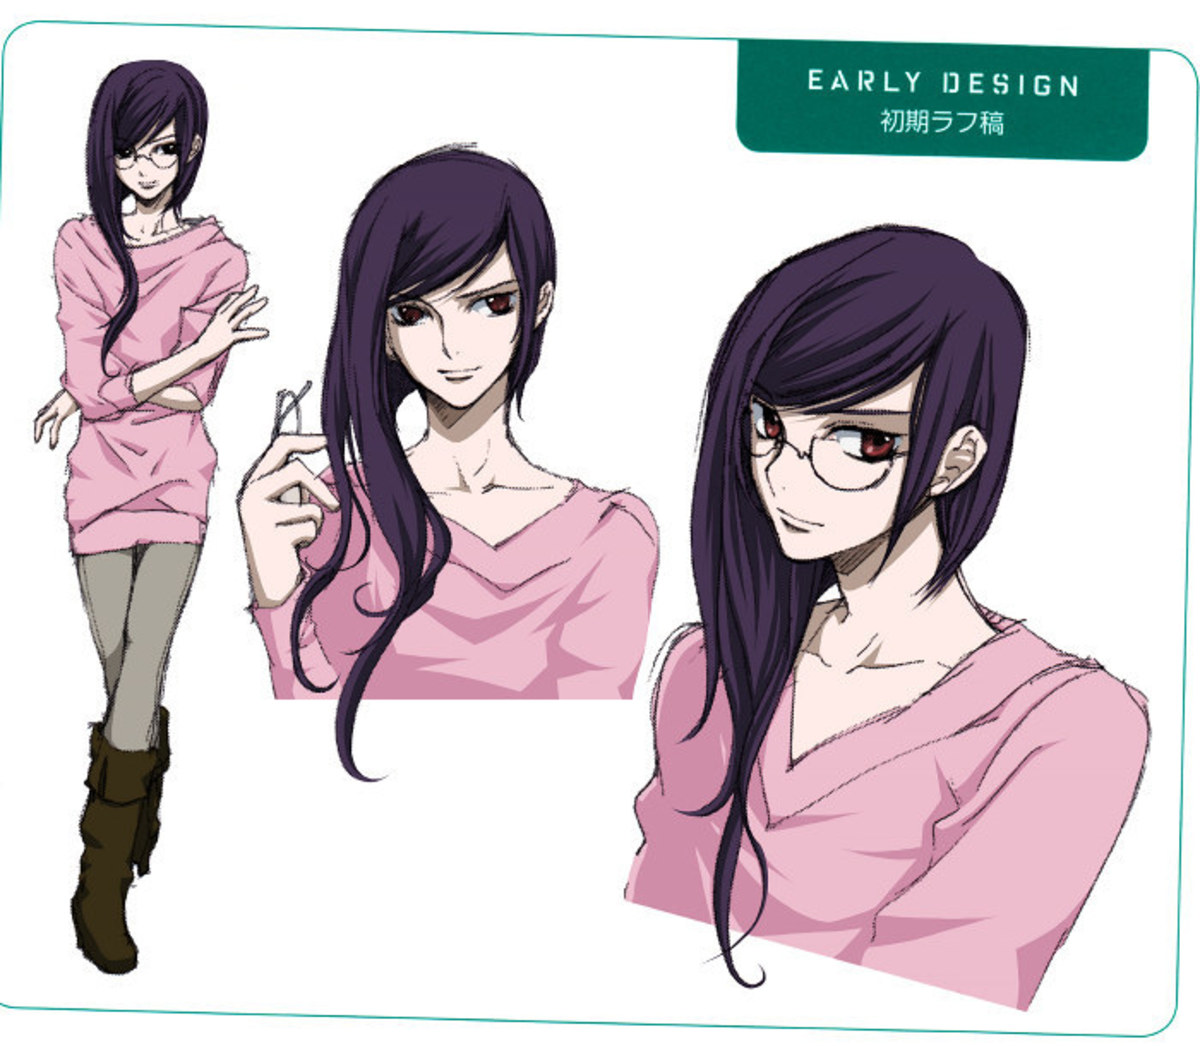 Tieria Erde’s Early Character Design Will Drive You Nuts